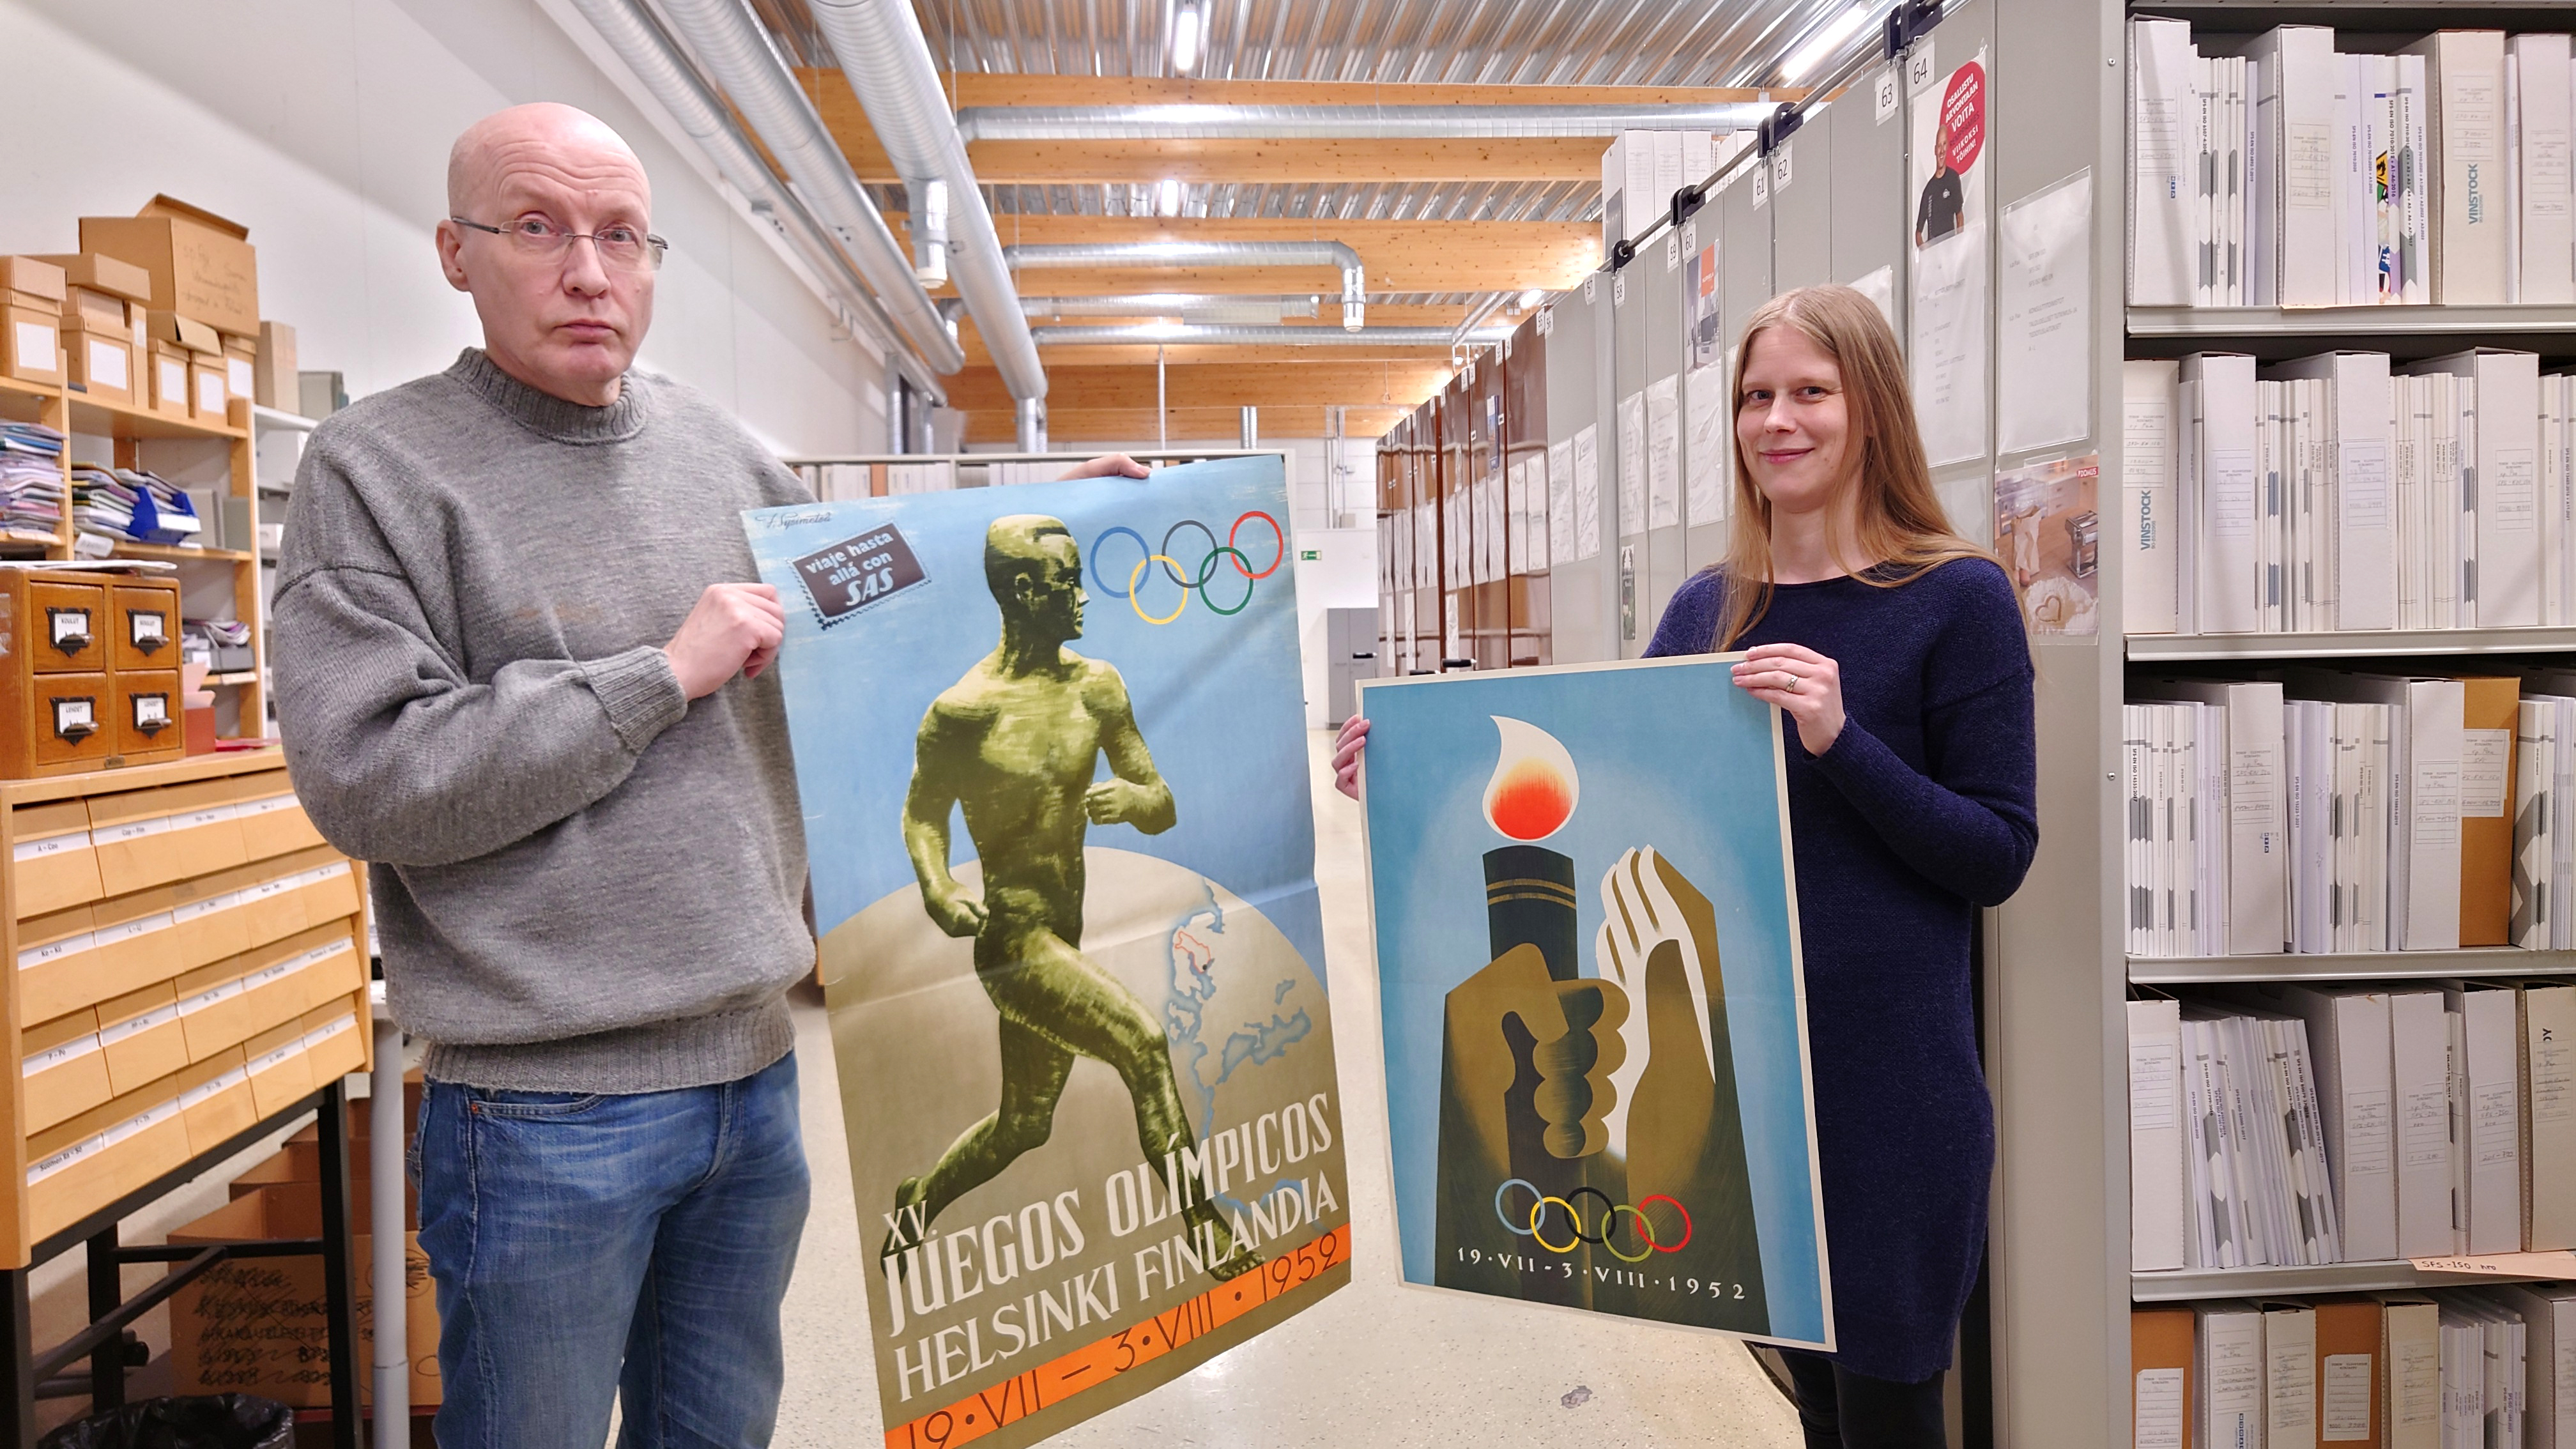 Two librarians present posters of the 1952 Helsinki Olympics at the Library's Newspaper and Ephemera Services in Raisio